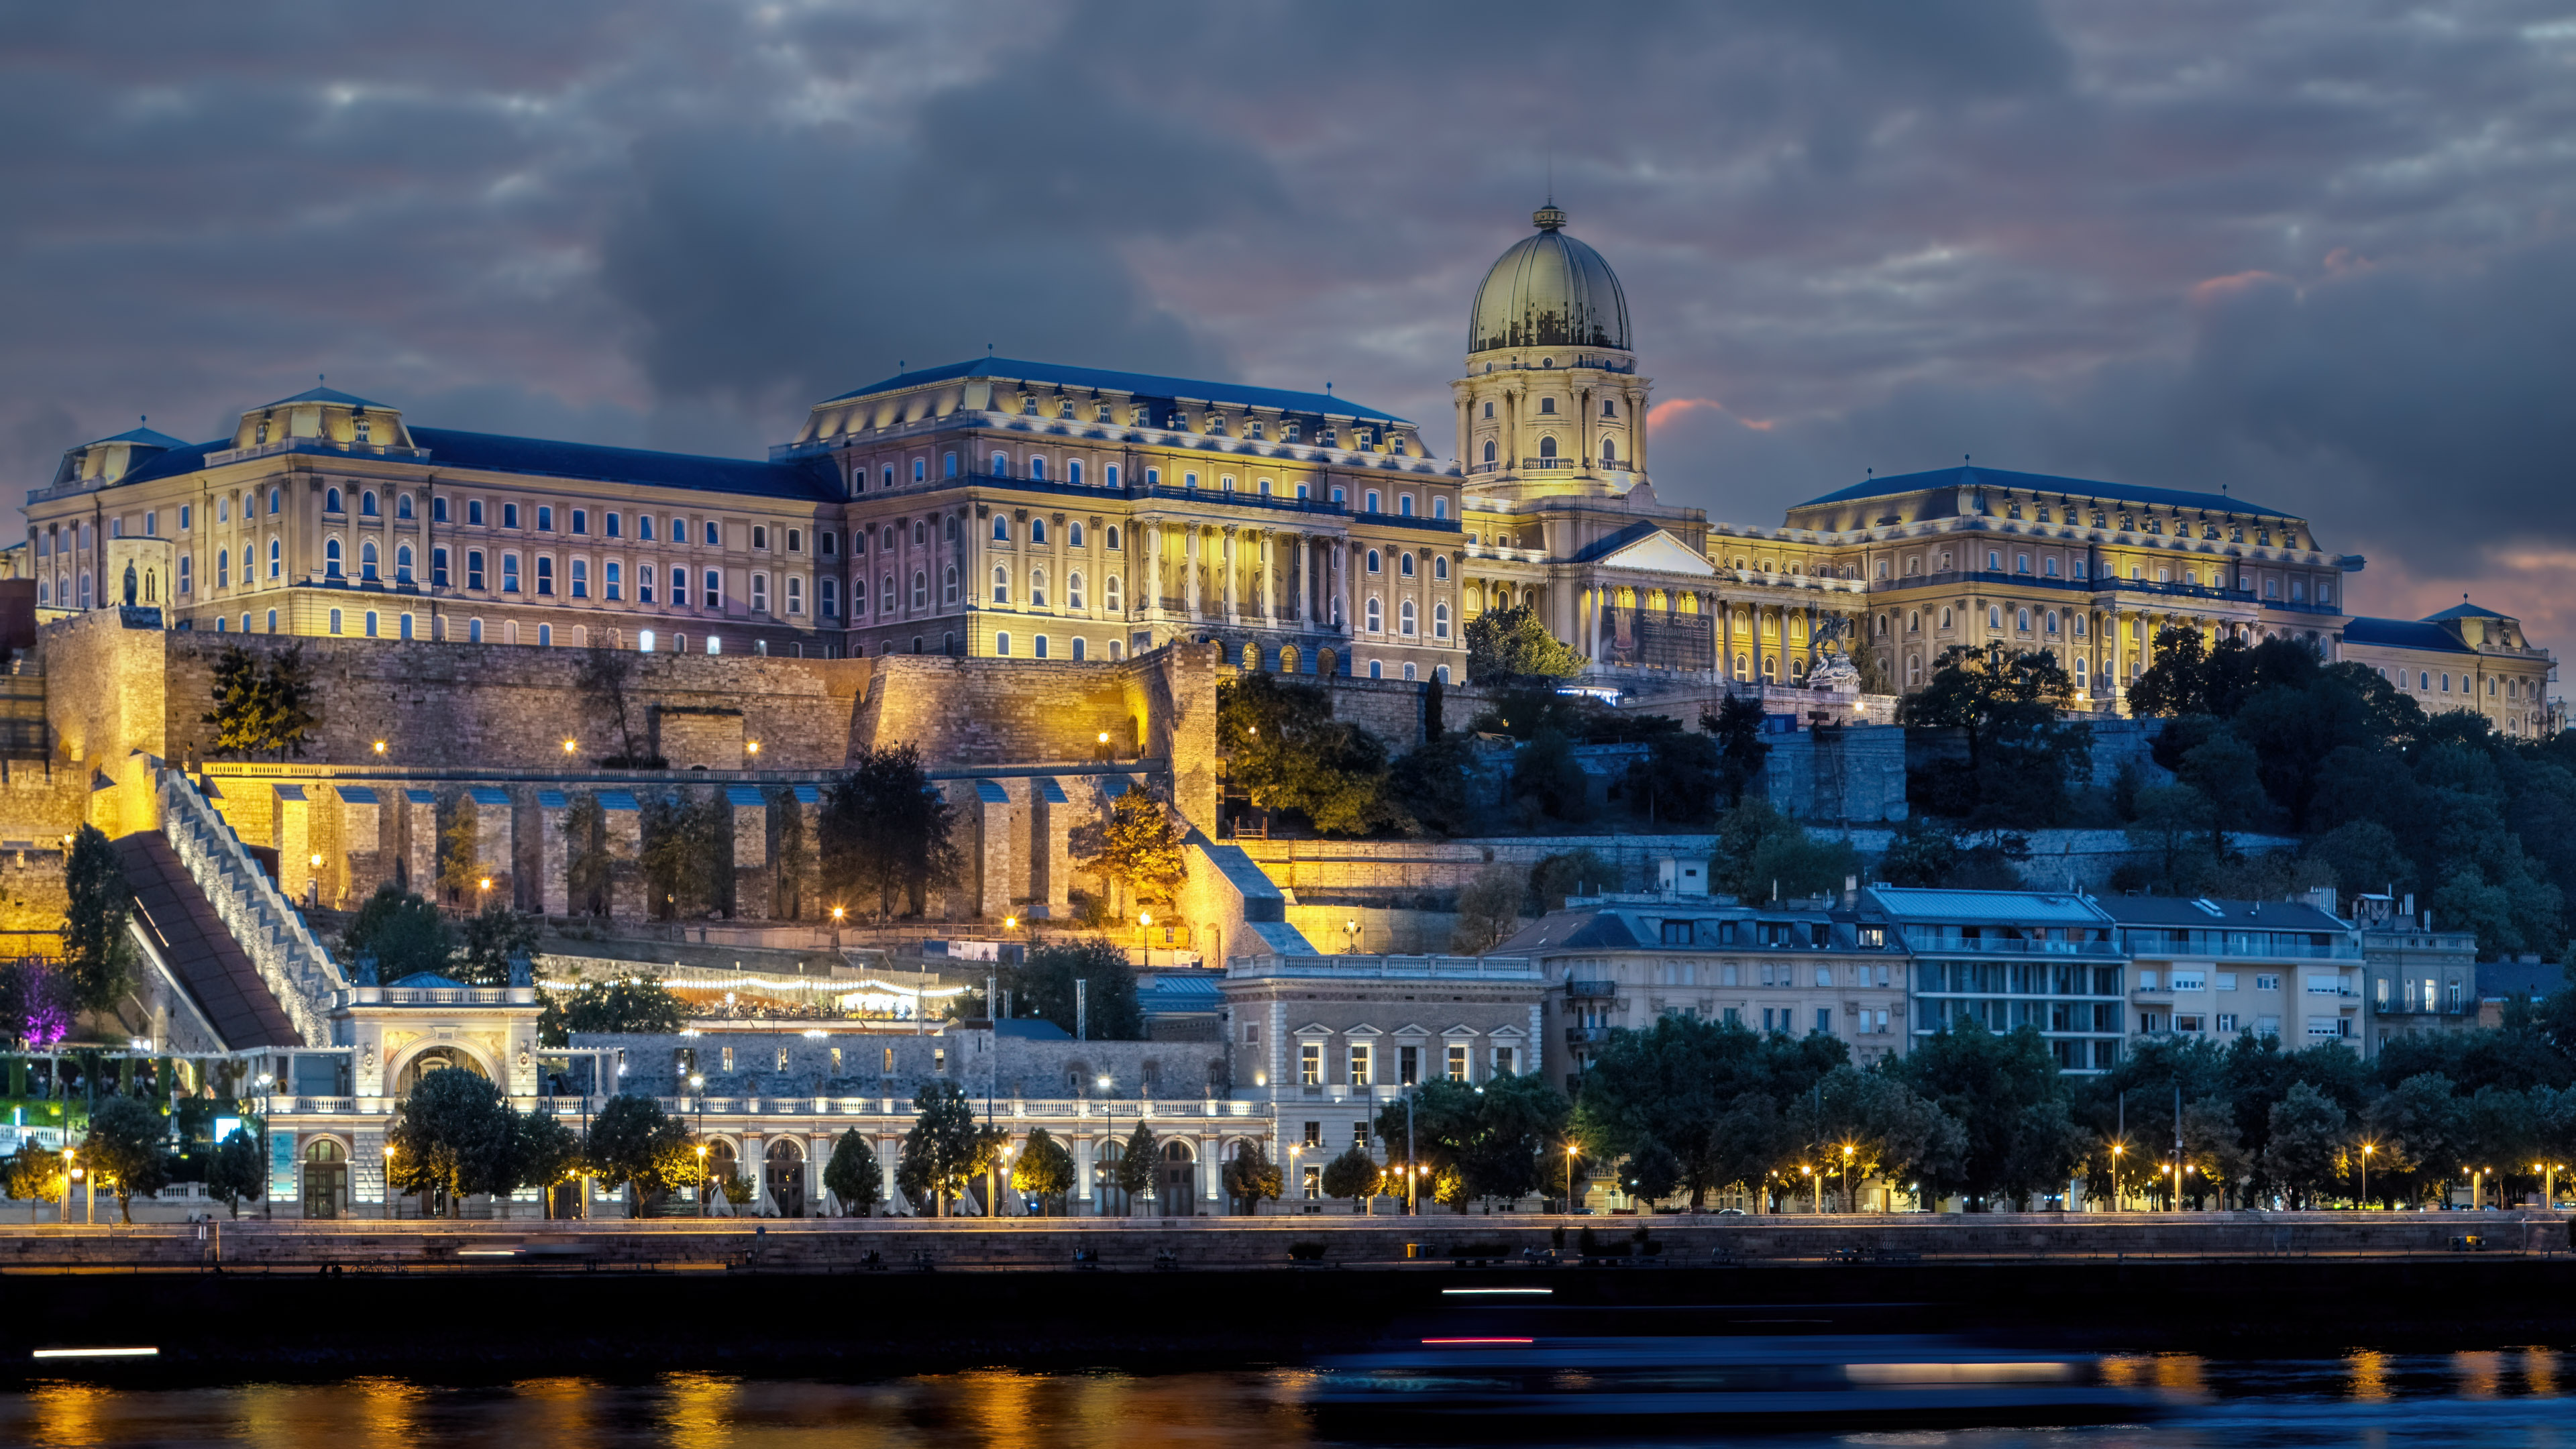 Enjoy the beauty of Budapest's cityscape at night with this stunning wallpaper. The colorful lights and breathtaking architecture will transform your screen into a work of art.